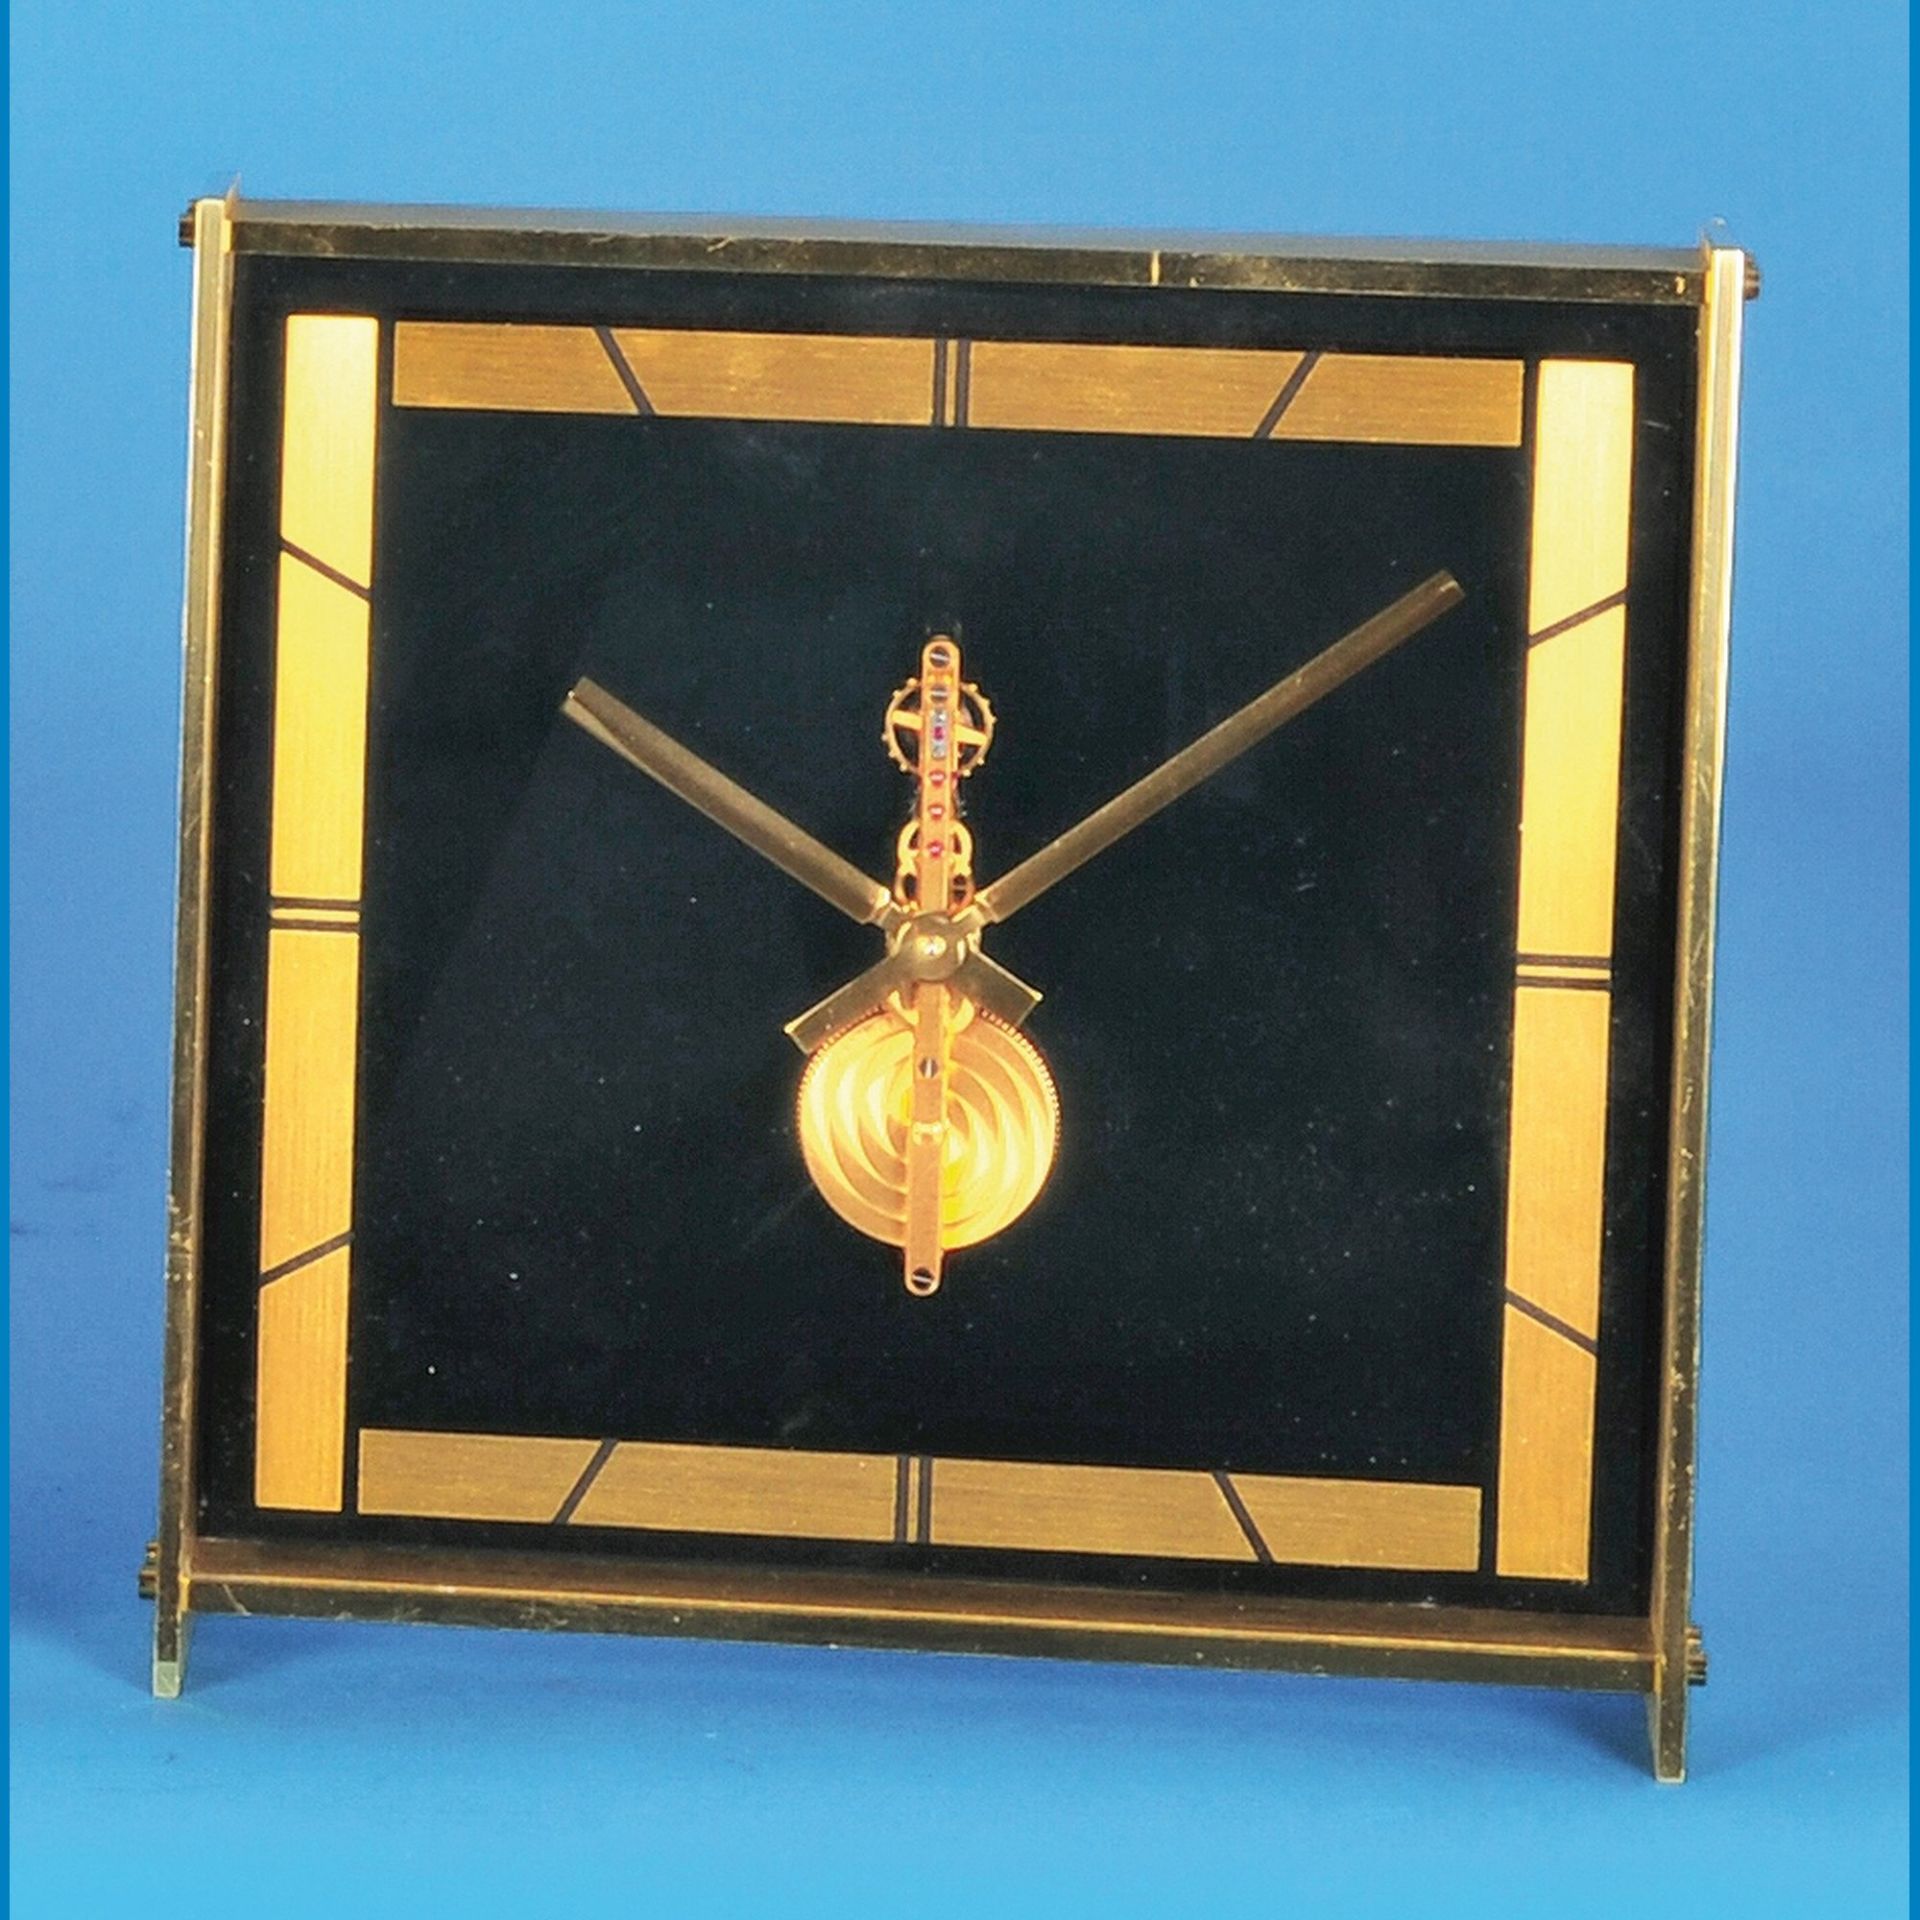 Jaeger-LeCoultre table clock with baton movement and 8- day movement, model 444